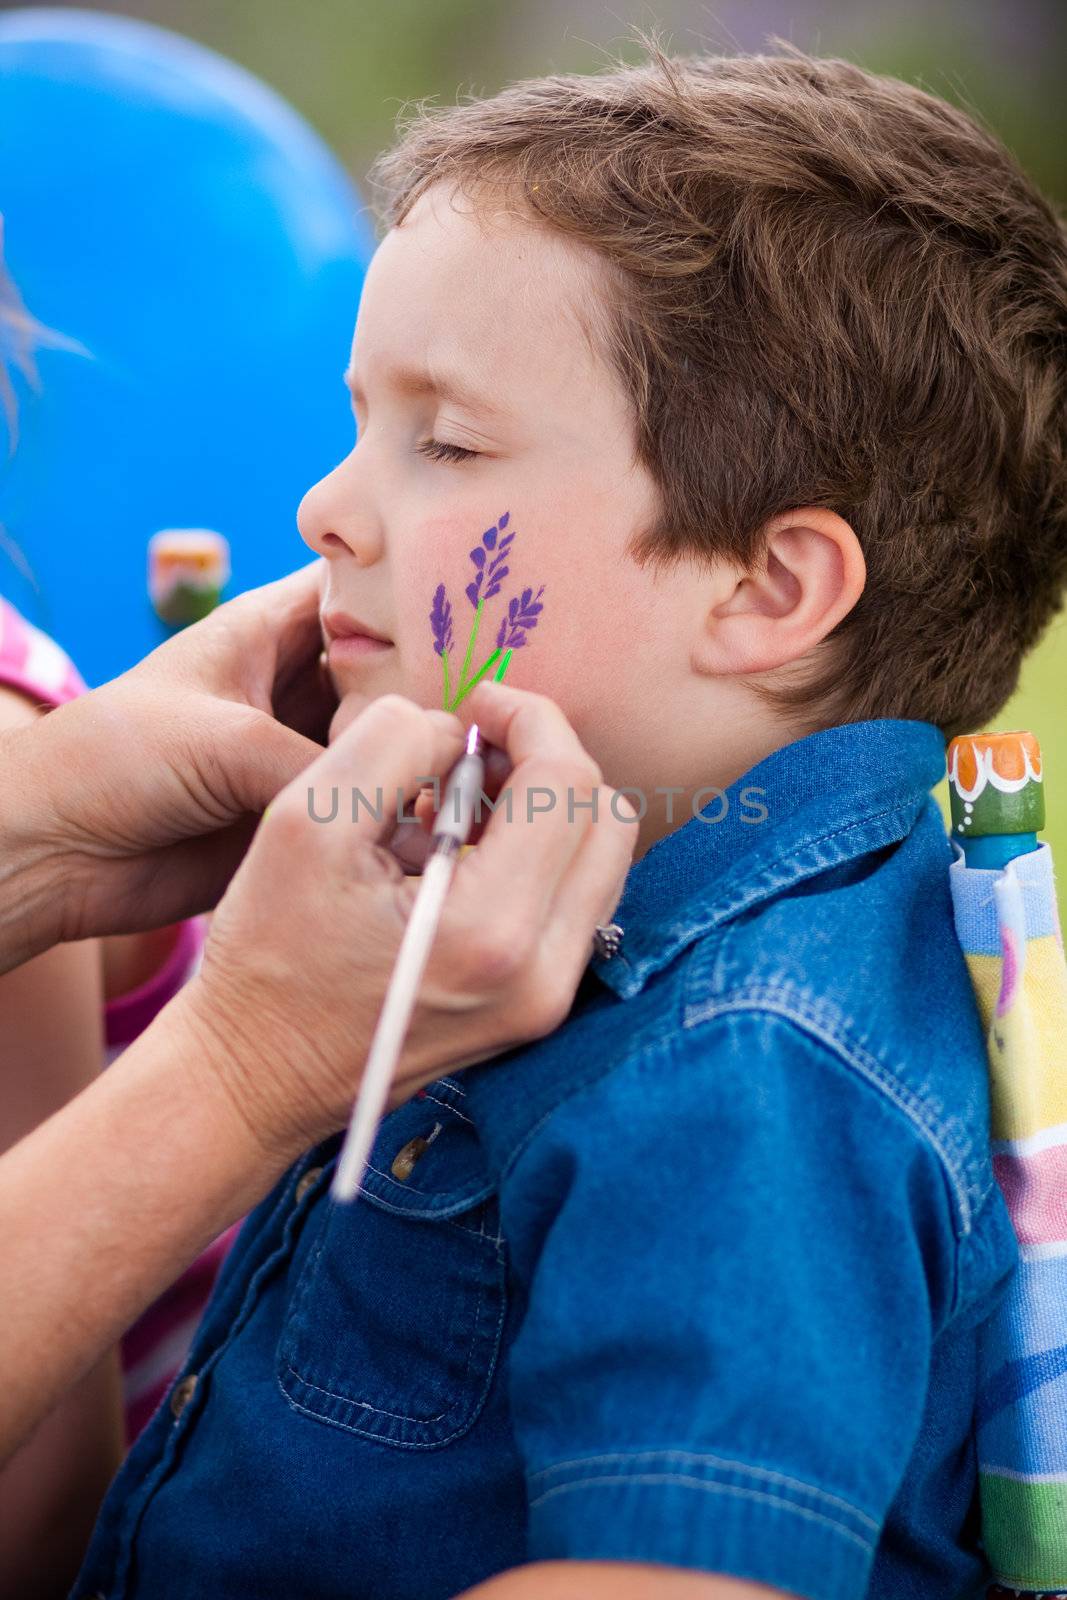 Cute little boy getting make-up on his face